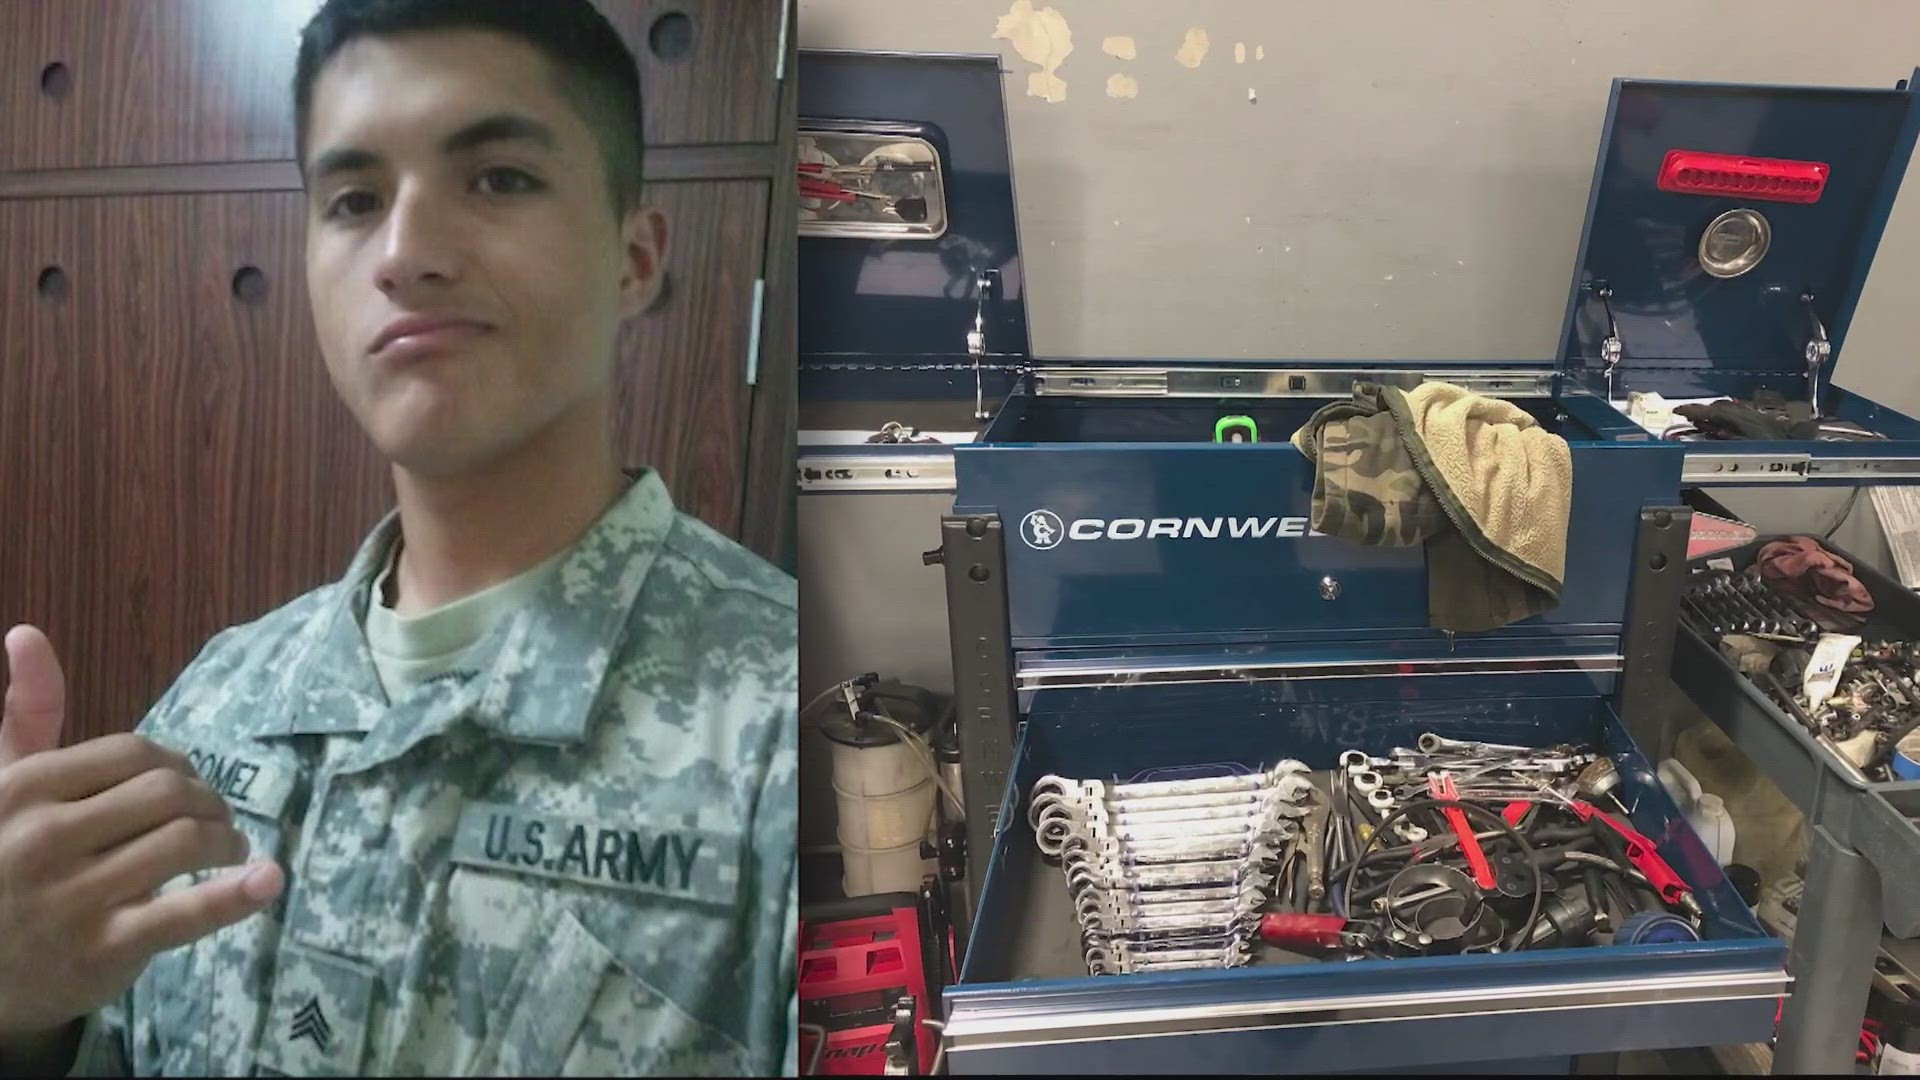 Army veteran Josh Gomez is trying to recover his things, including expensive tools that had sentimental value.